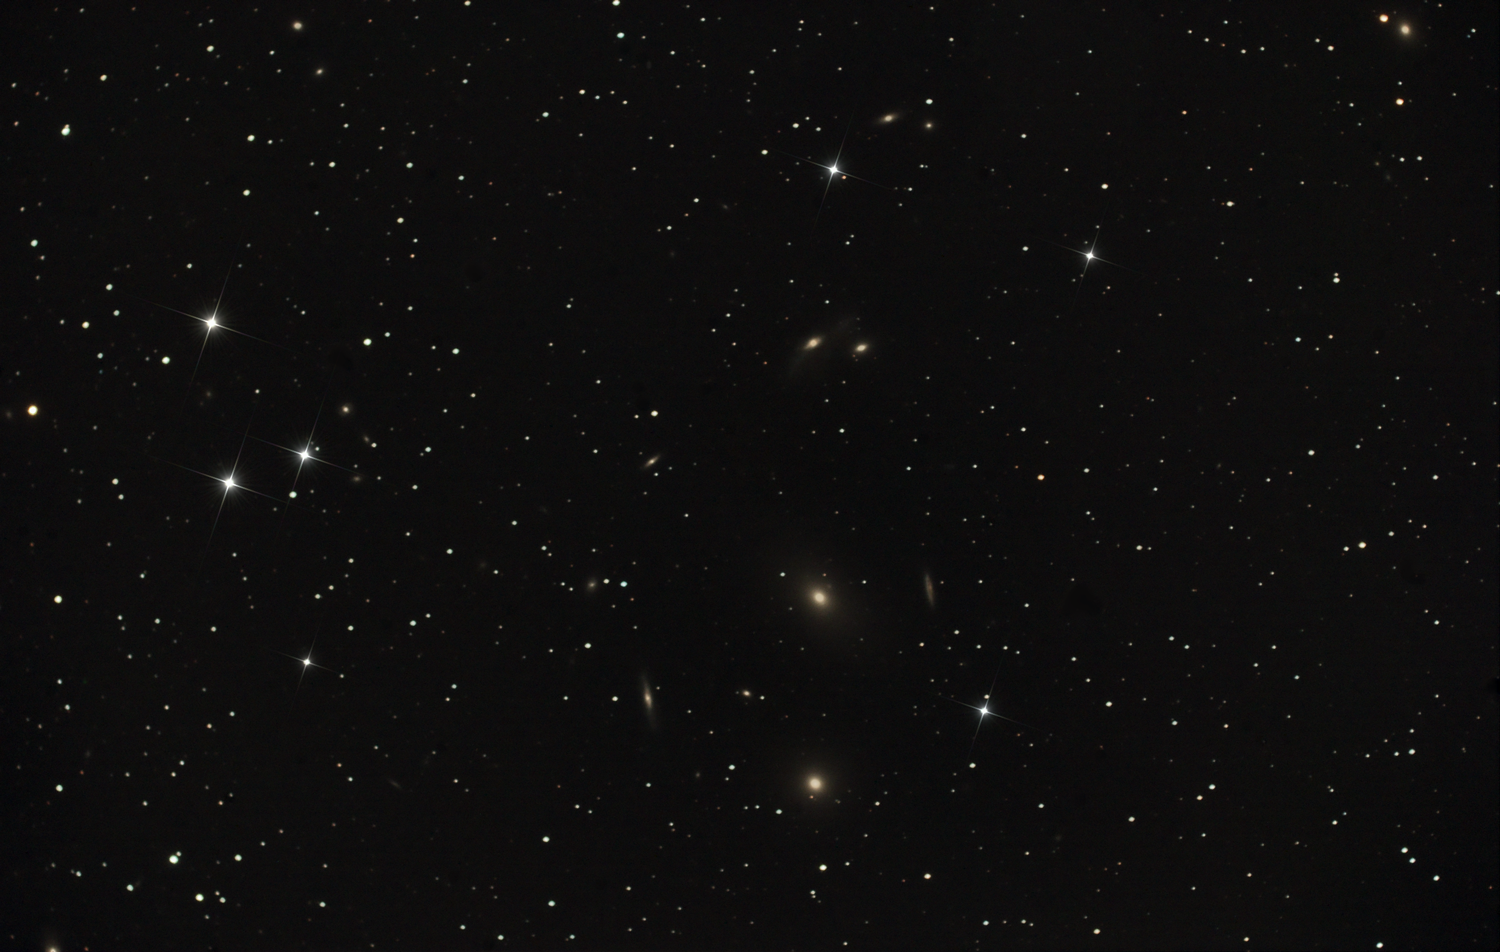 Markarian Chain (Group Of Galaxies In Virgo)